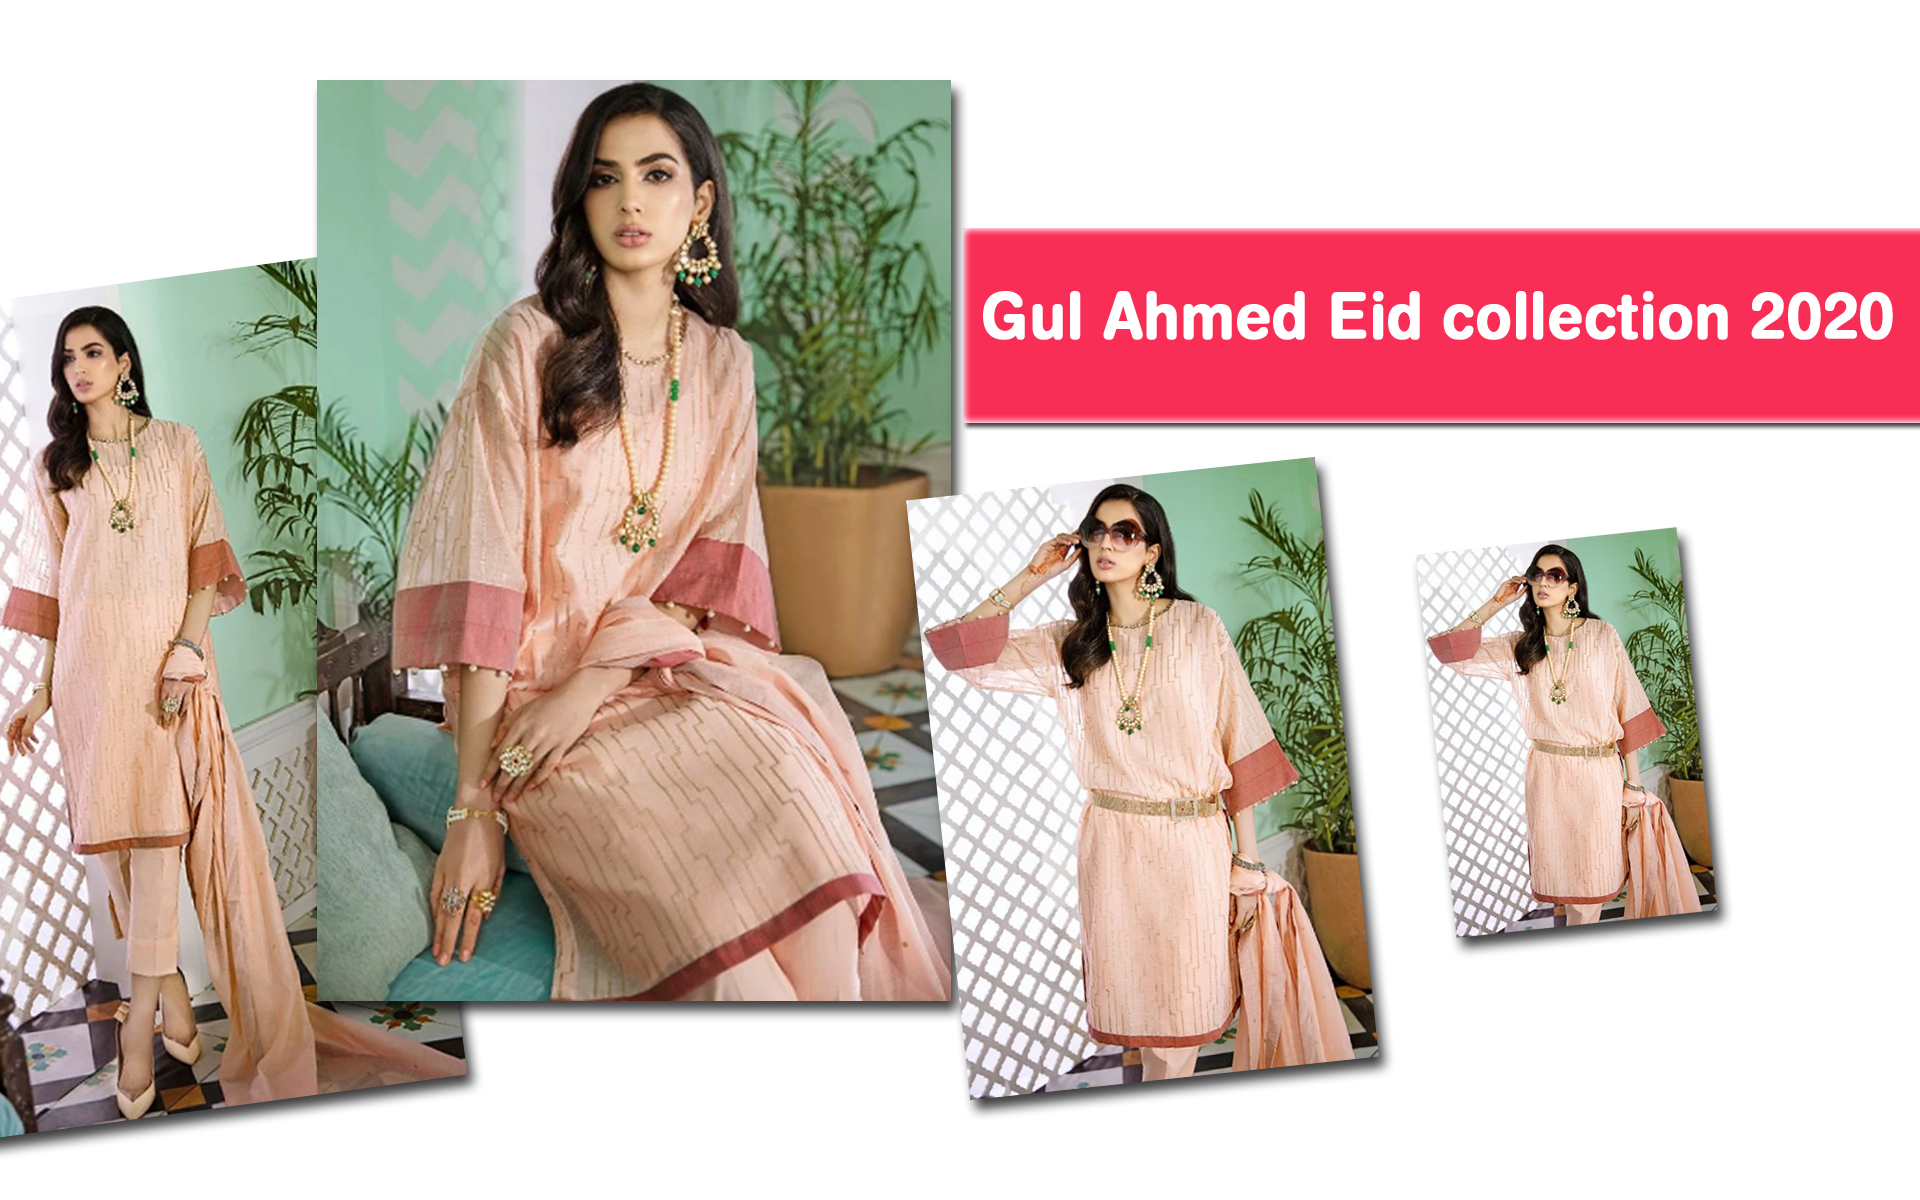 The most awaited Gul Ahmed Eid collection 2020 is here